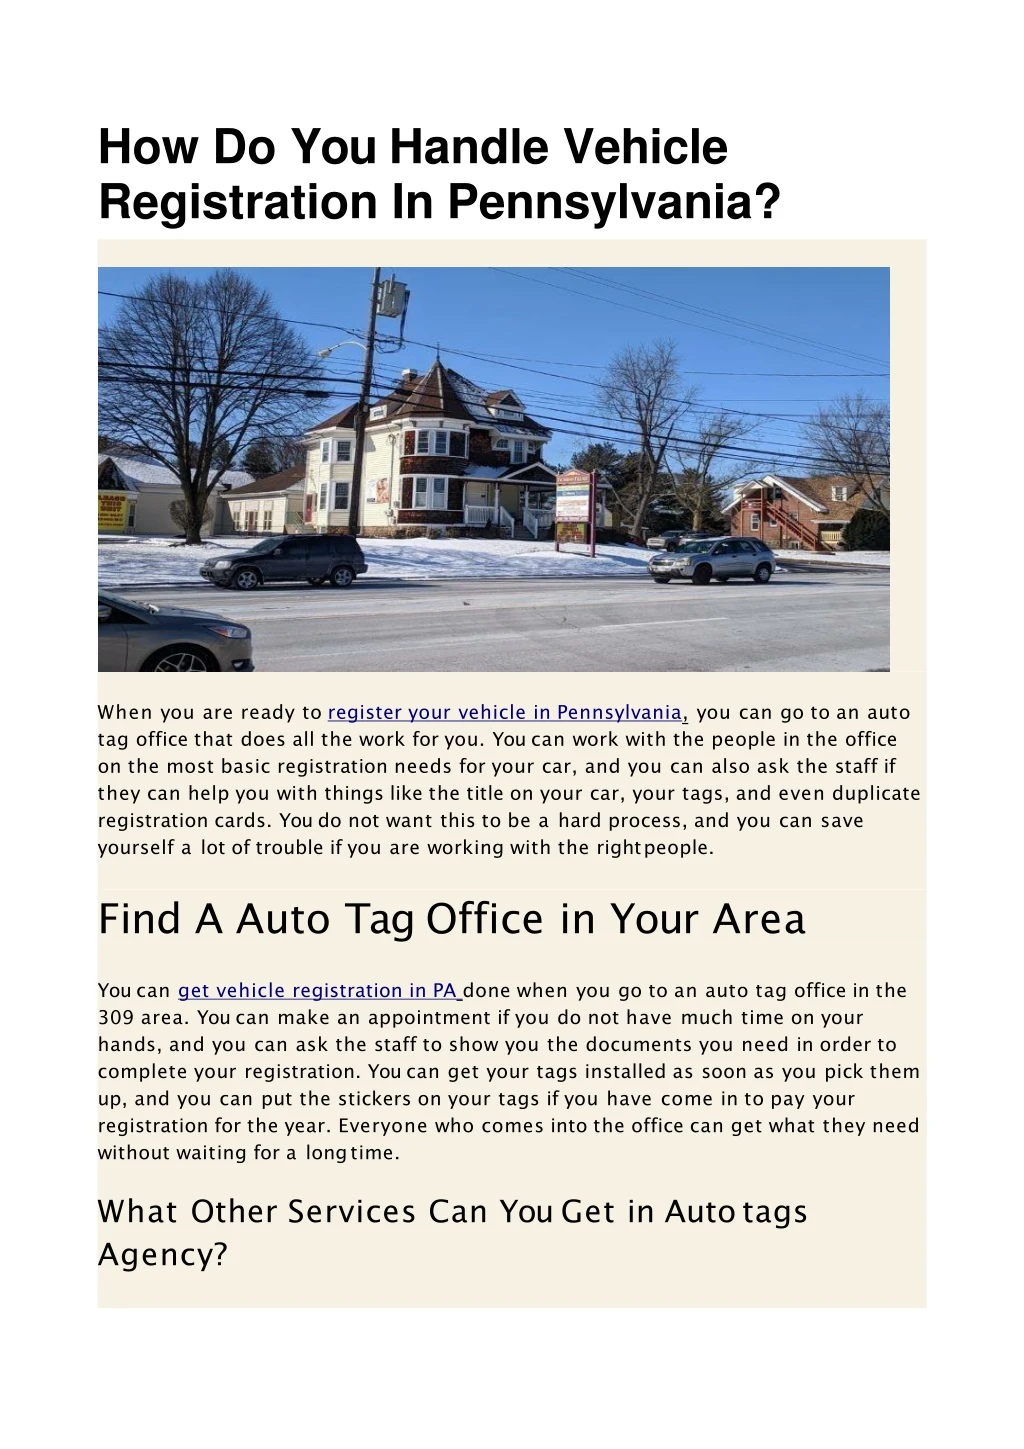 how do you handle vehicle registration in pennsylvania